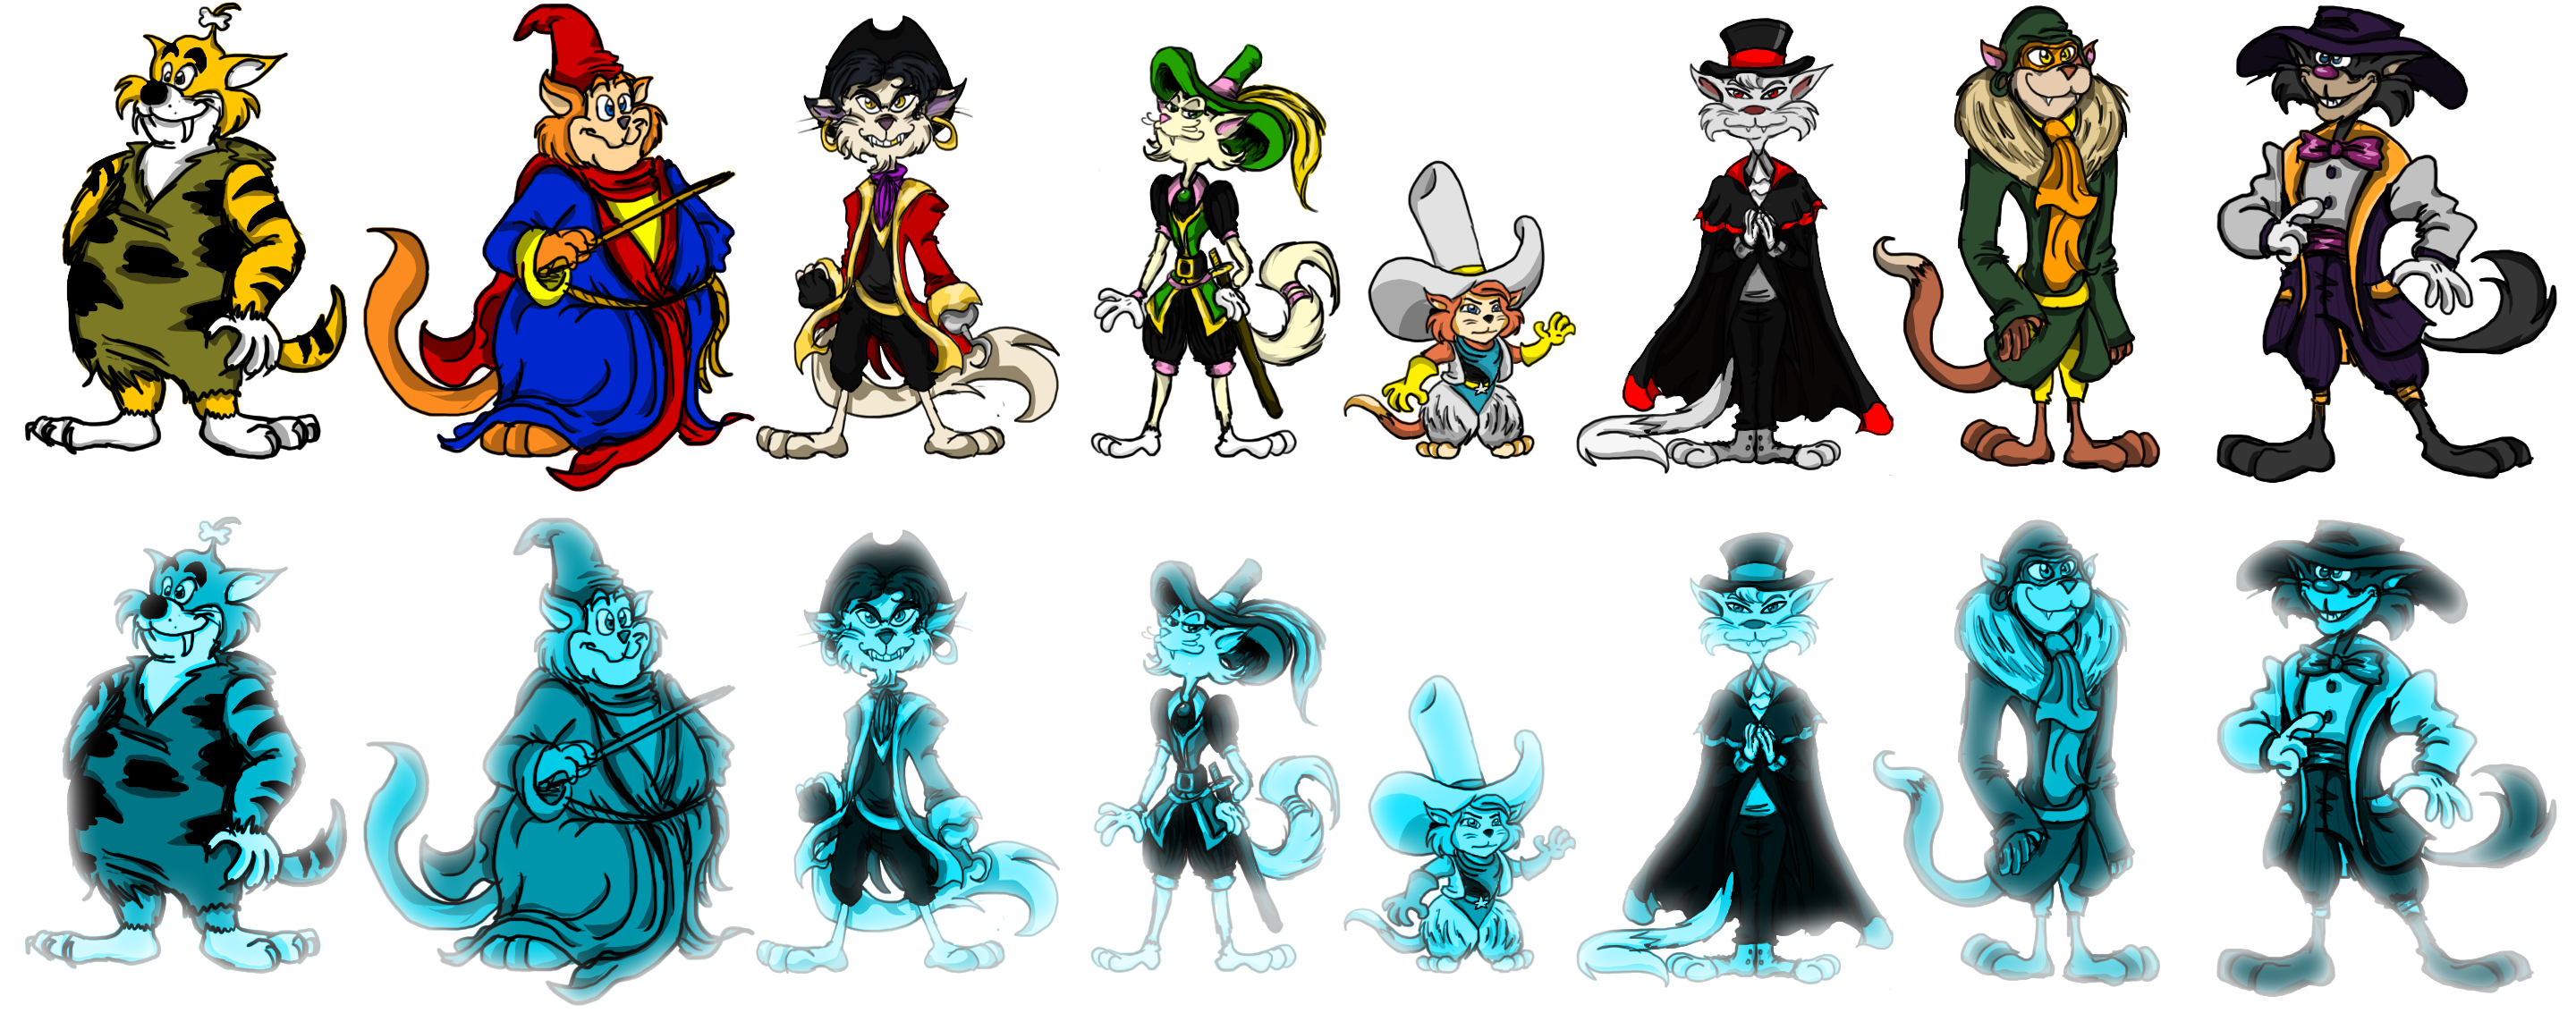 Fraidy Cat - The Eight Previous - Line Up by DarkenedSparrow on